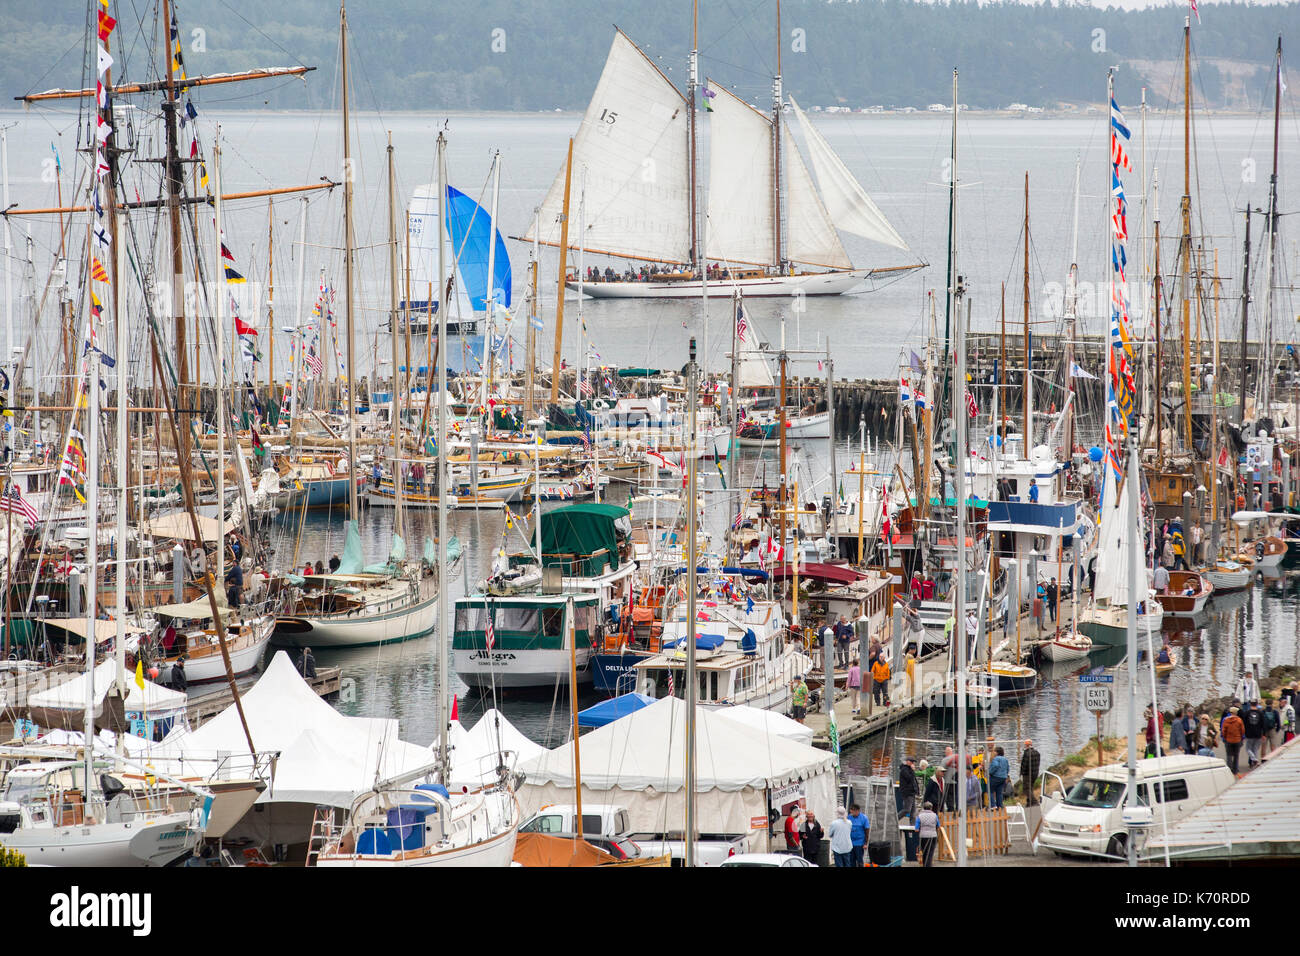 Wooden Boat Show Port Townsend, sailing boat in marina harbor, Point Hudson. With Adventuress schooner in background. Stock Photo